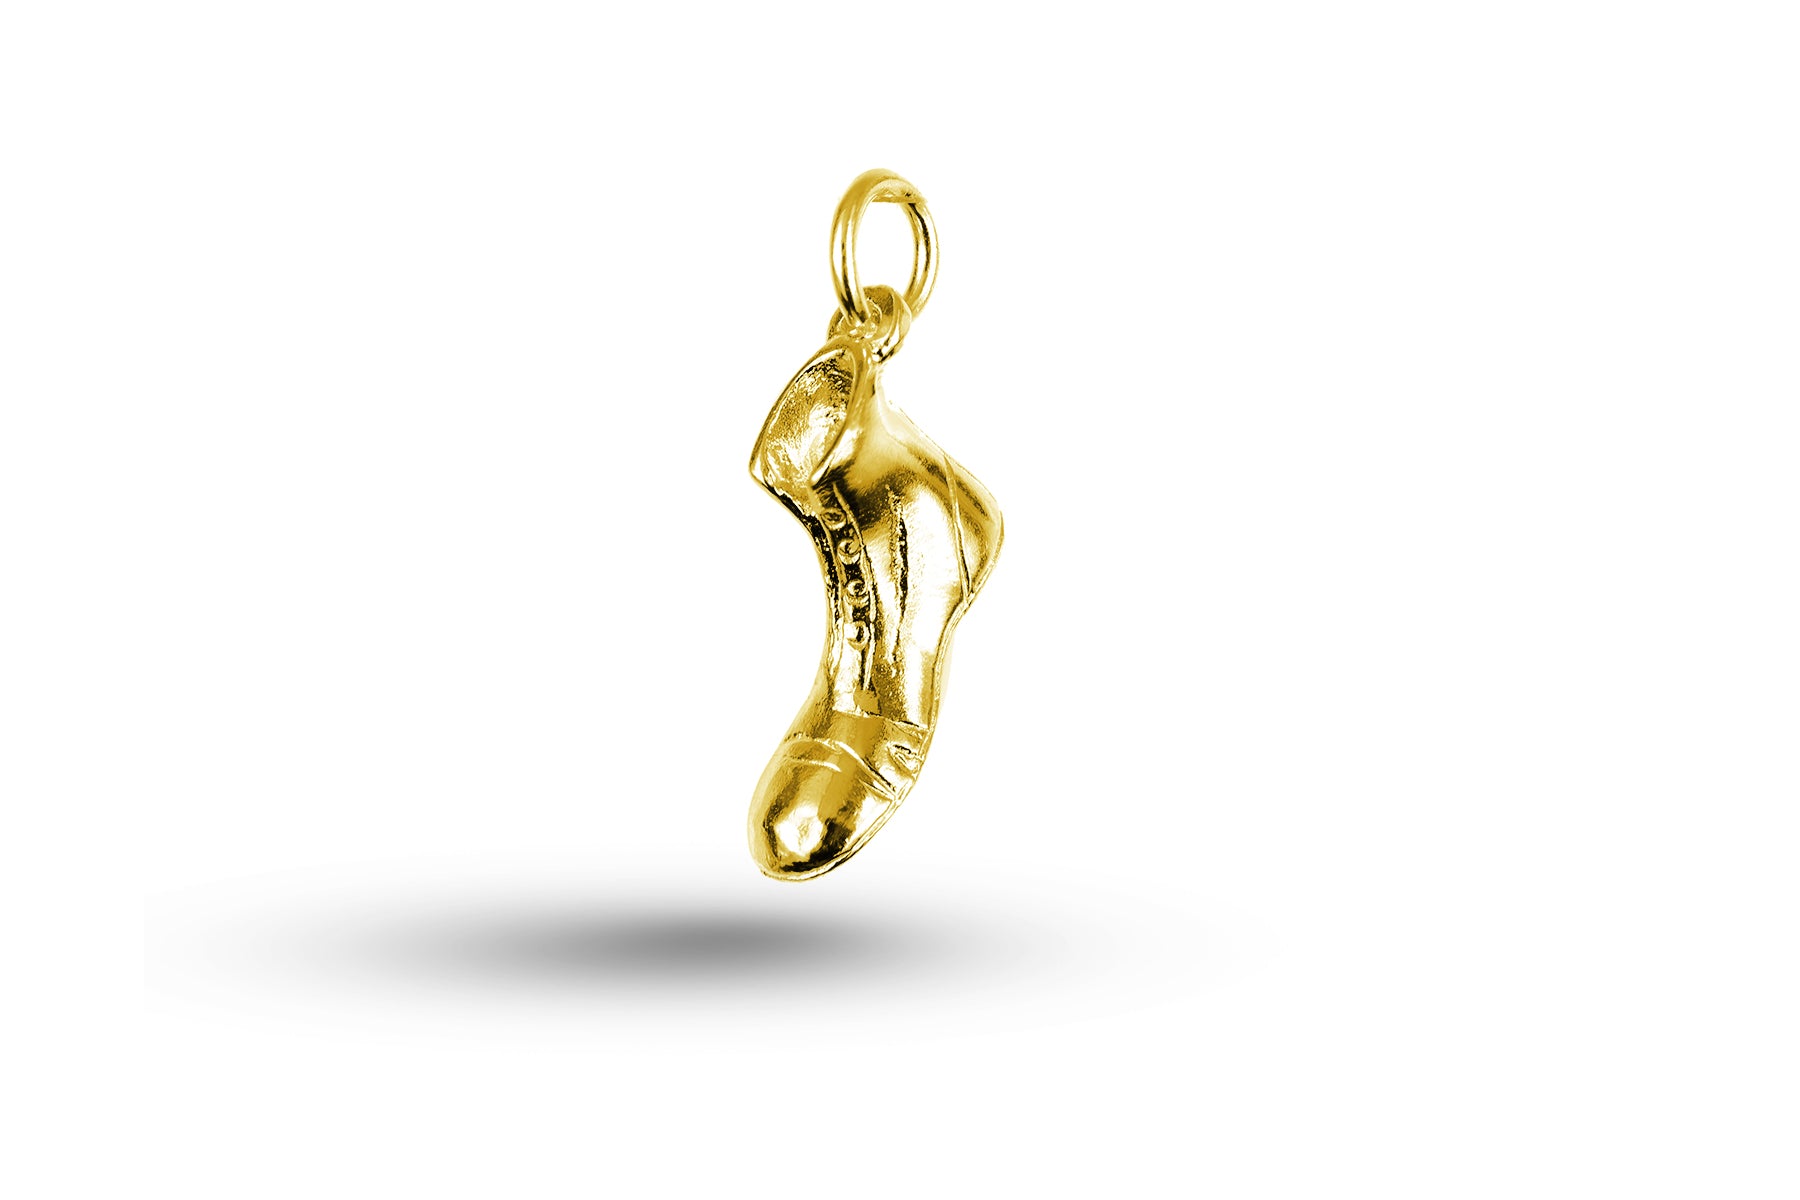 Luxury yellow gold Boxing Boot charm.